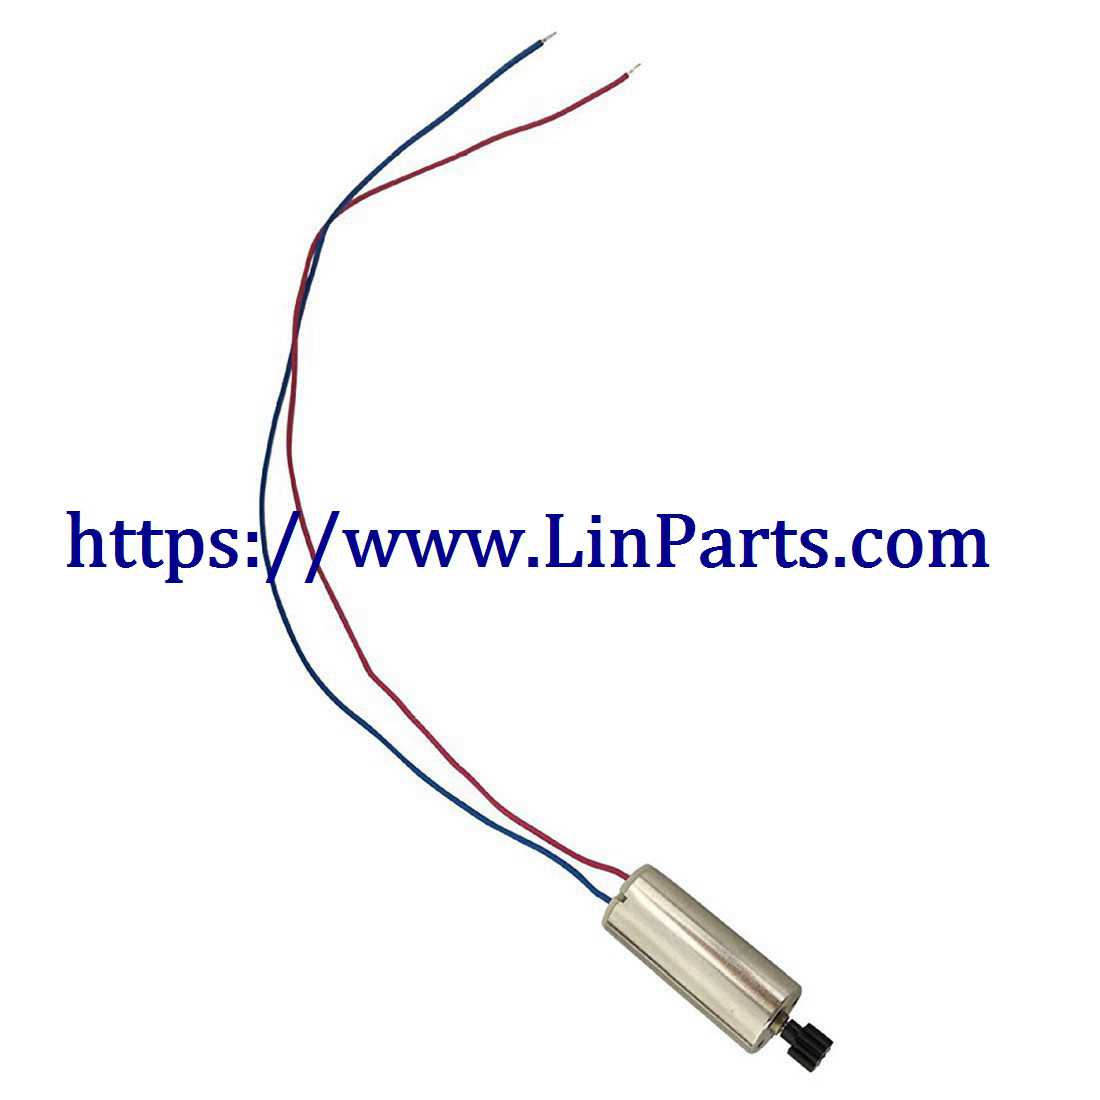 LinParts.com - VISUO XS809S RC Quadcopter Spare Parts: Motor [red and blue line]